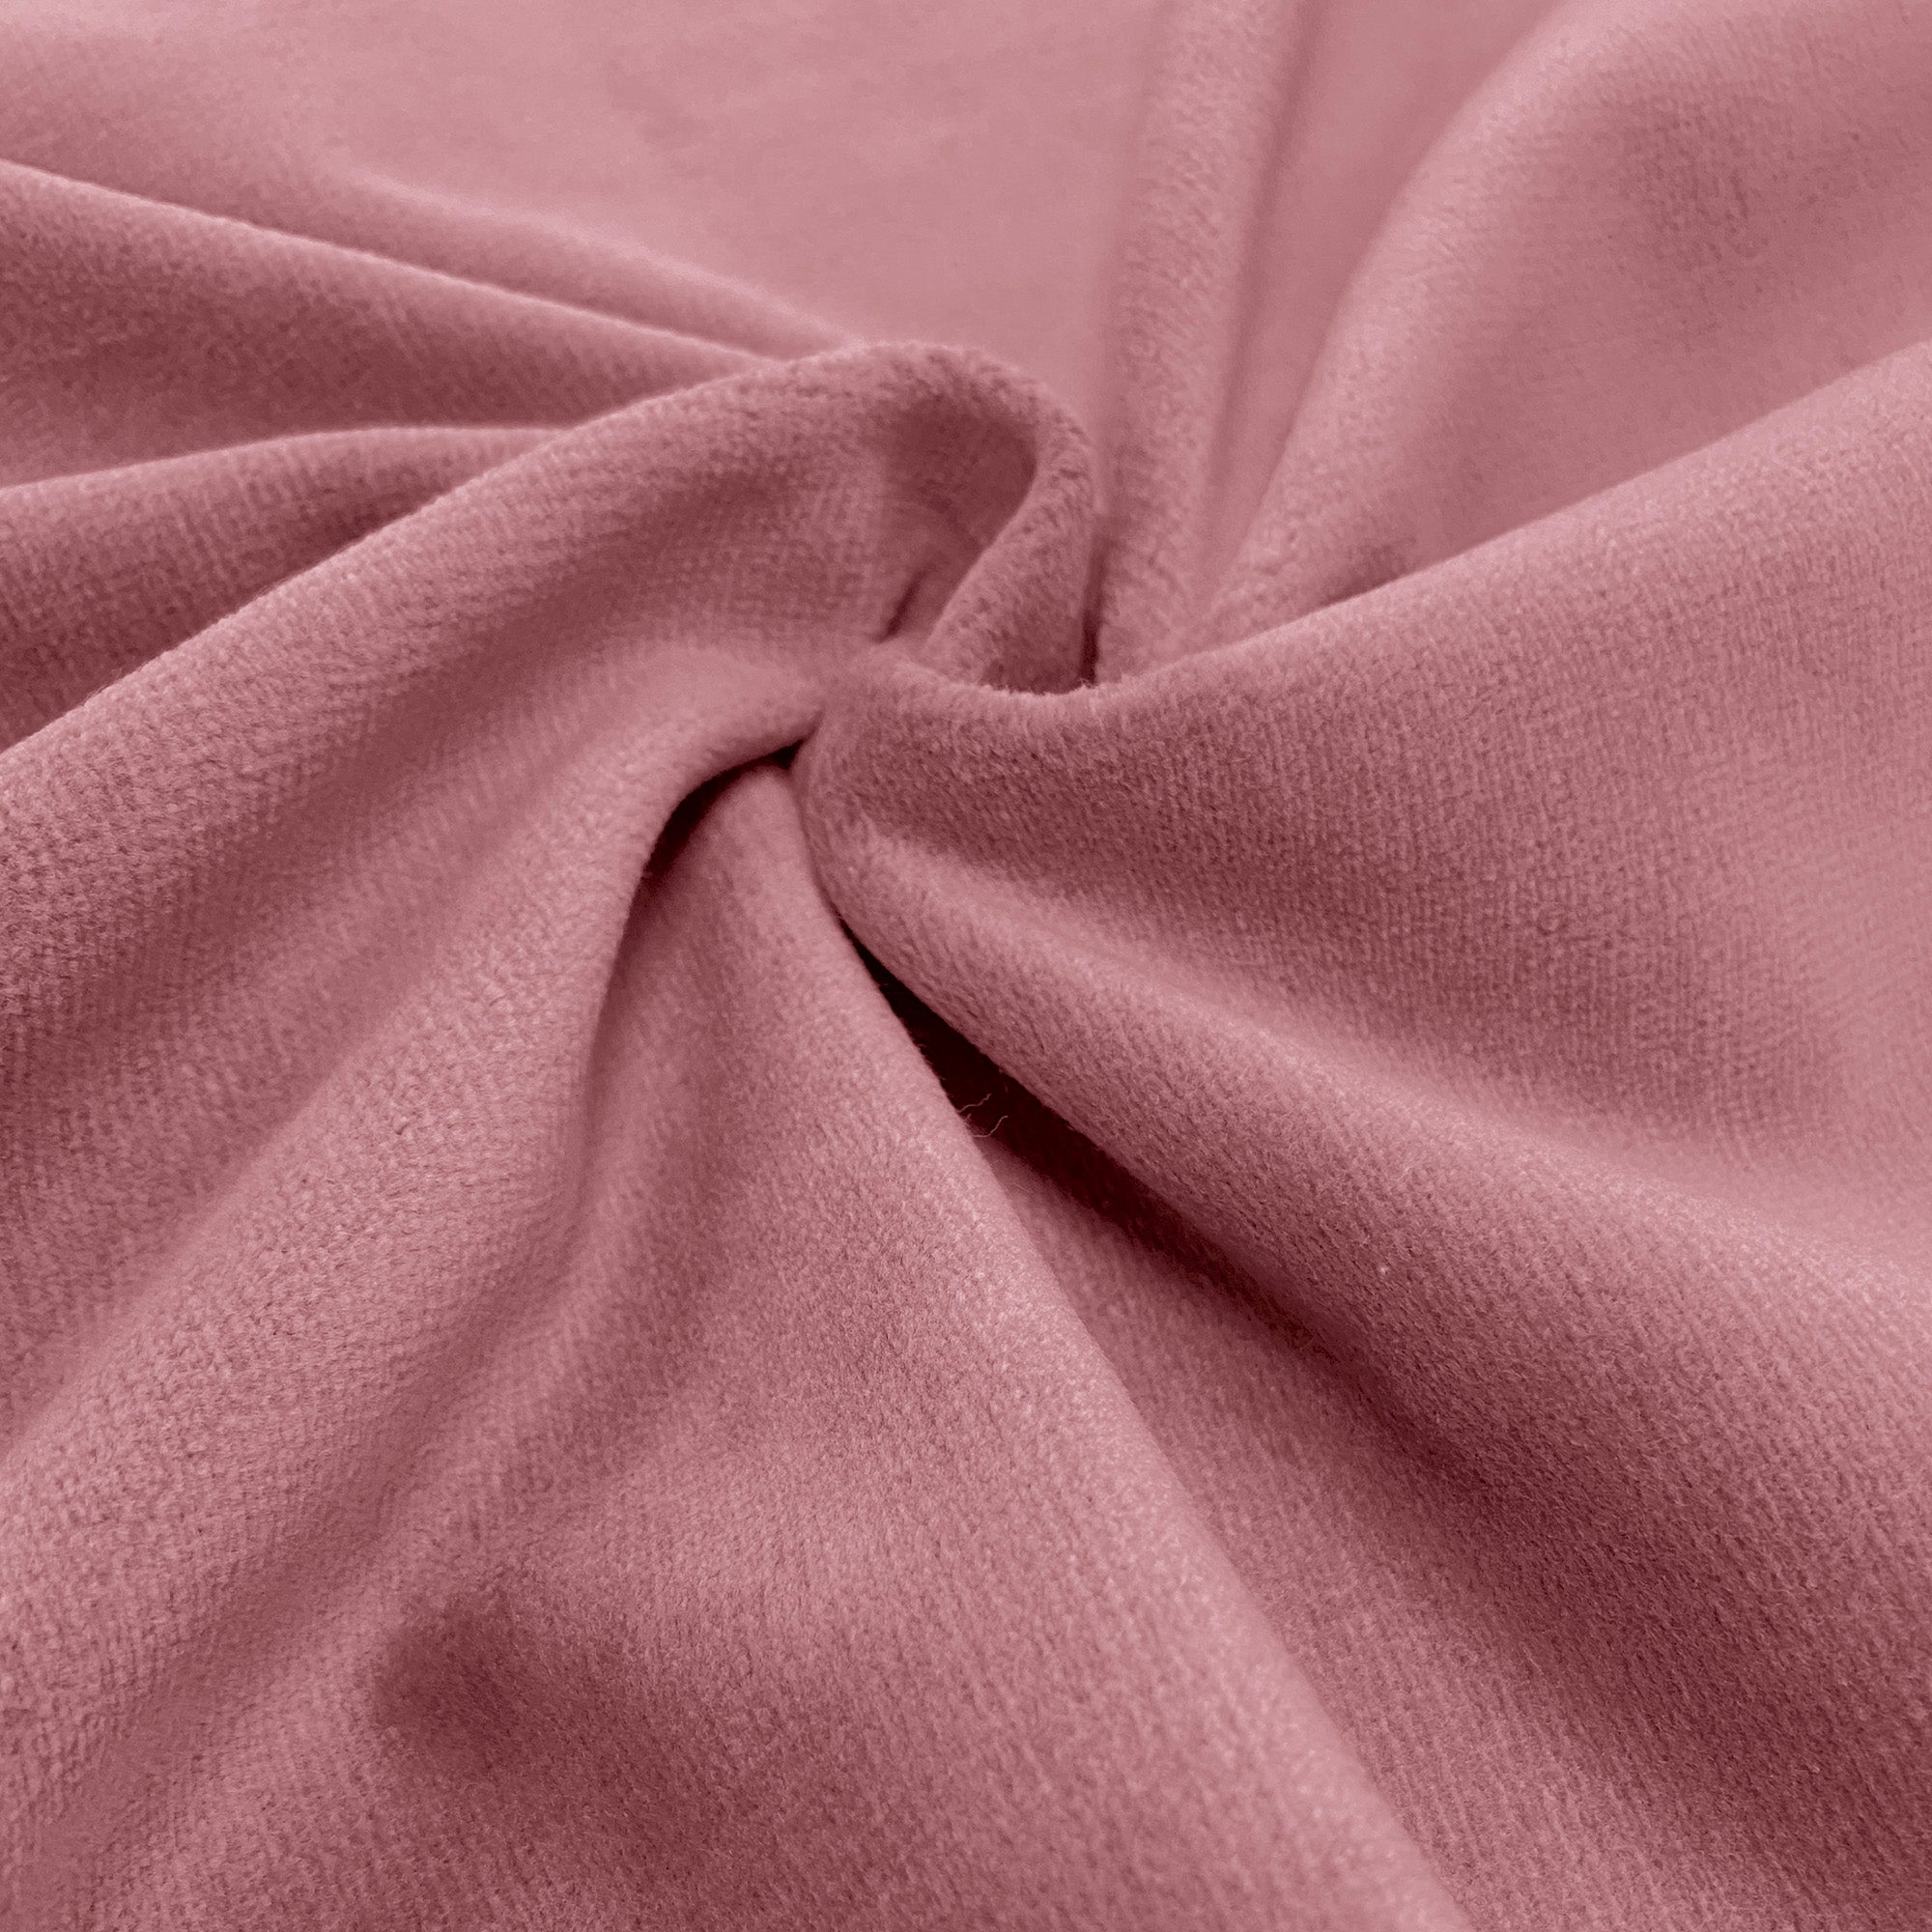 Light Pink Cotton Velvet by the Yard, 54 Inch Wide Velvet, Upholstery  Weight Fabric, Curtain Fabric, Fashion Velvet Fabric,upholstery Velvet 